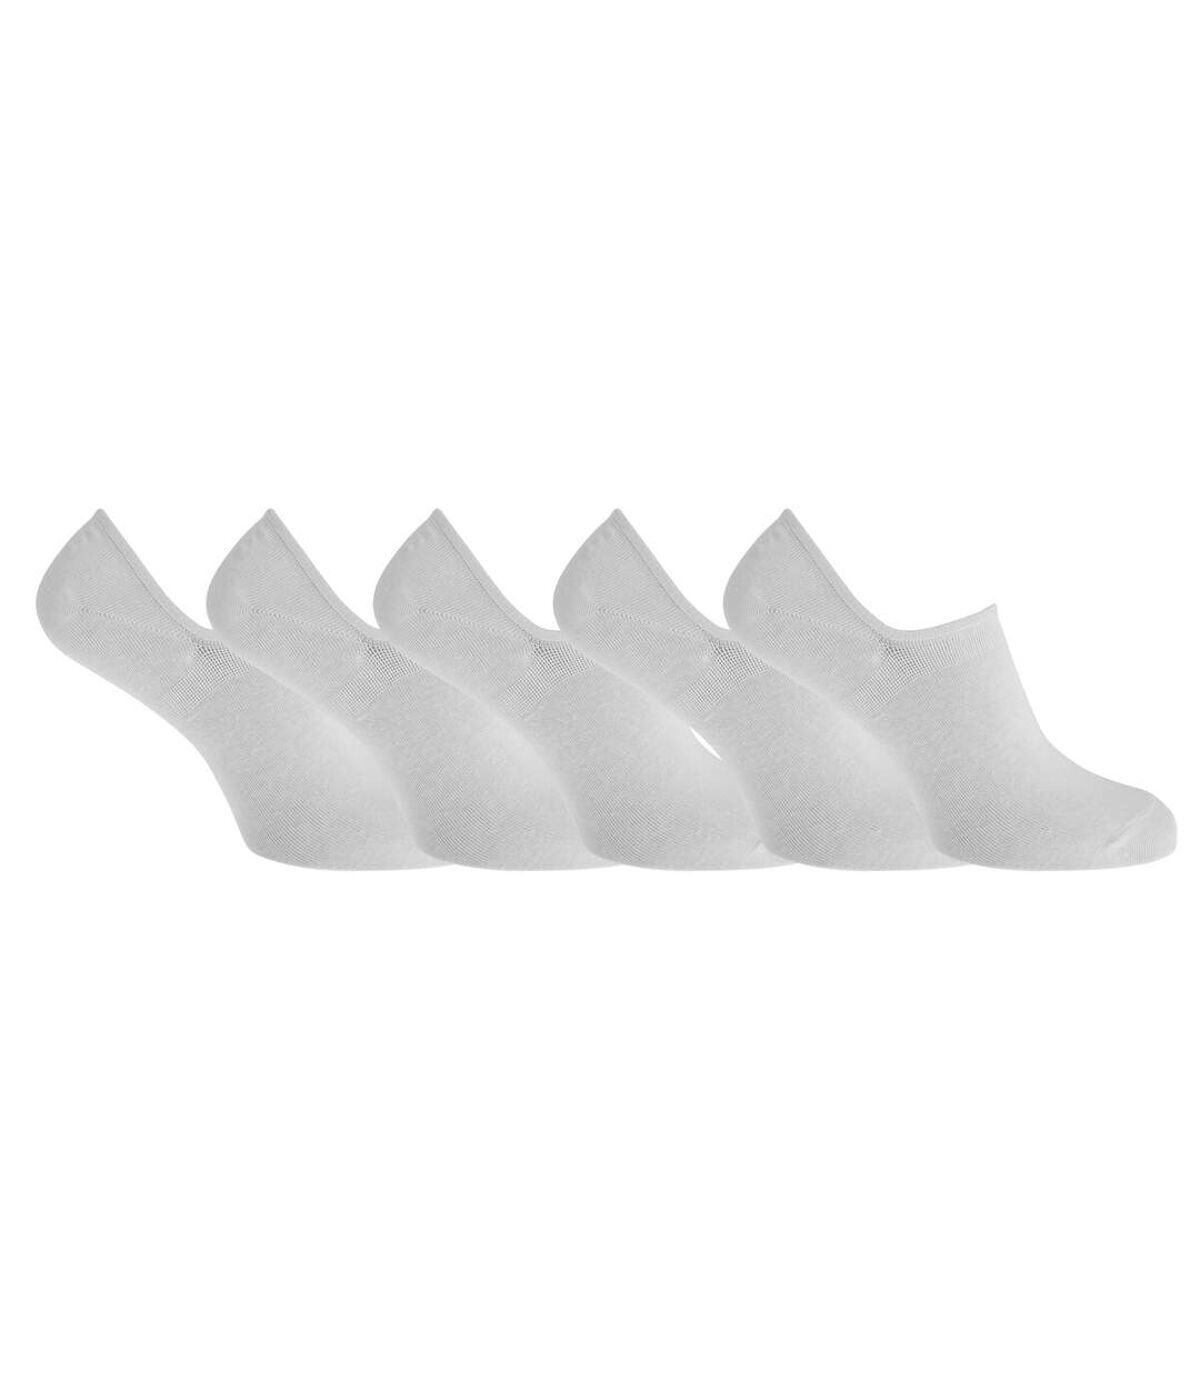 Tom Franks Mens T-Sport Silicone Support Invisible Trainer Socks (5 Pairs) (White) - UTMB525